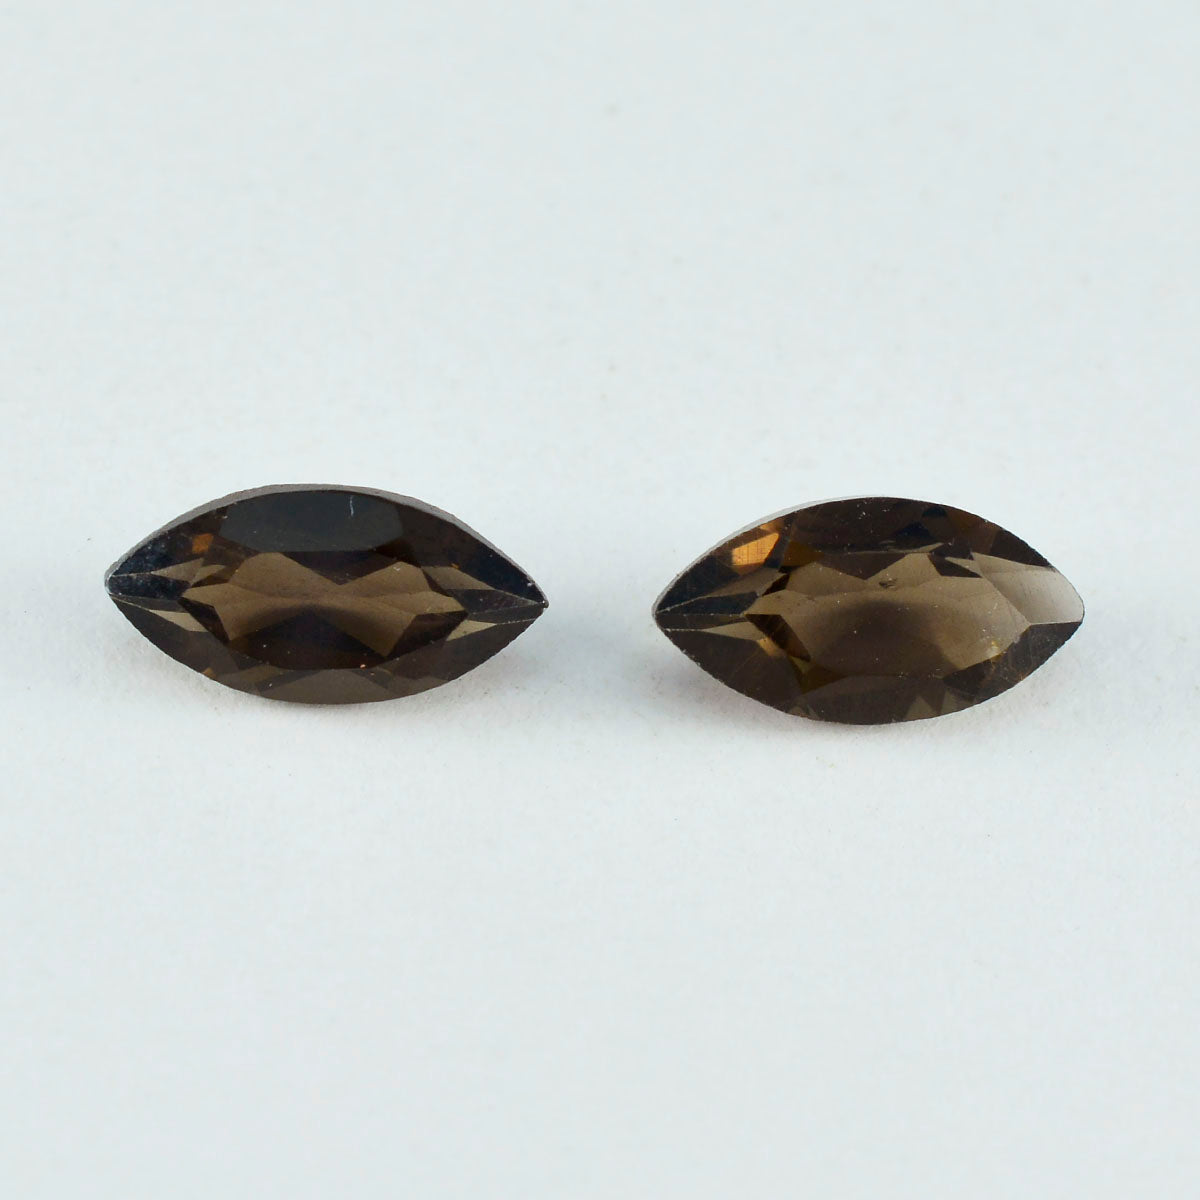 Riyogems 1PC Natural Brown Smoky Quartz Faceted 9x18 mm Marquise Shape handsome Quality Loose Stone